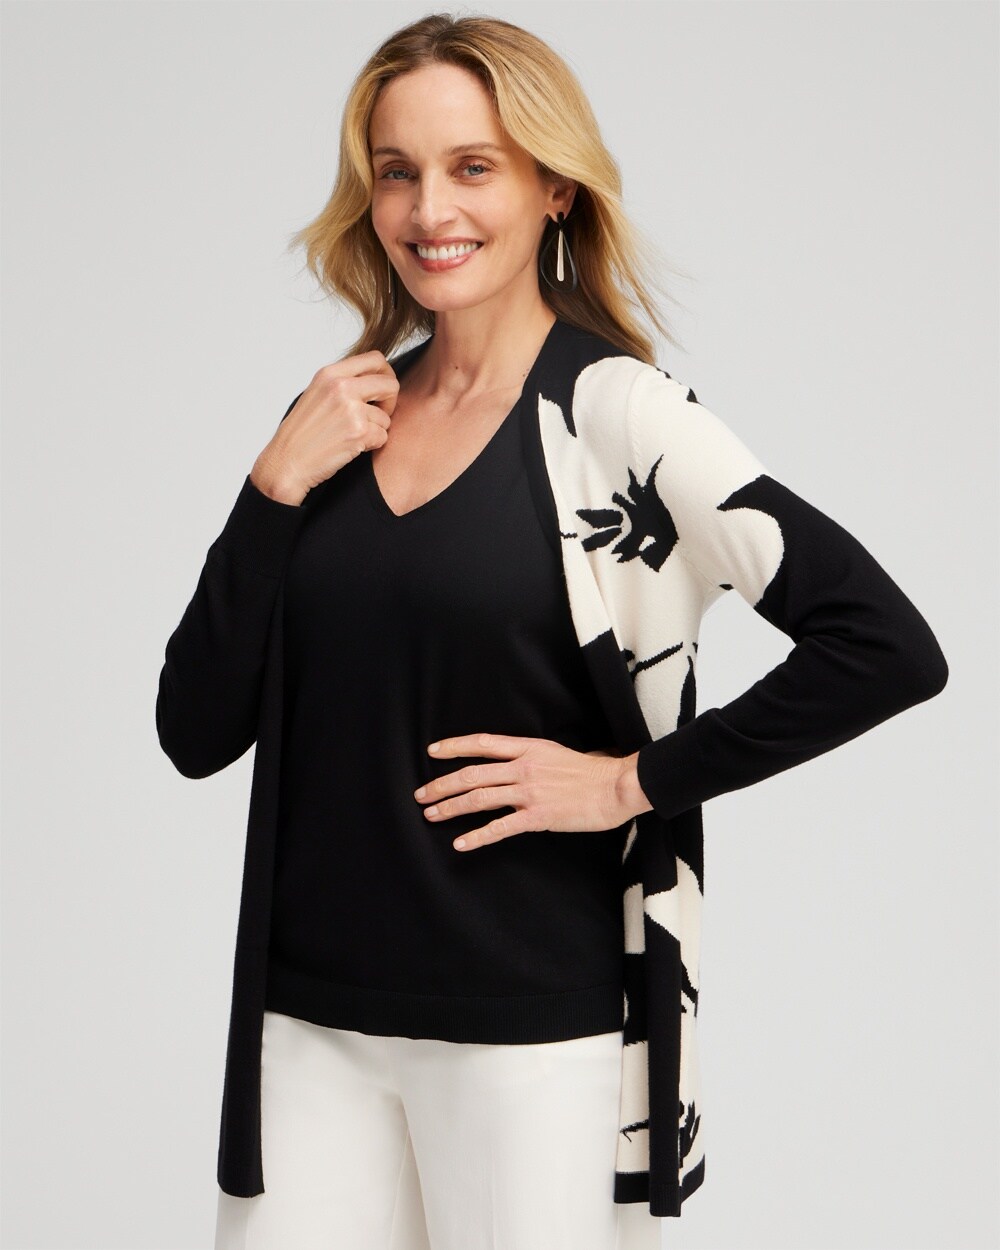 Spun Rayon Floral Cardigan video preview image, click to start video